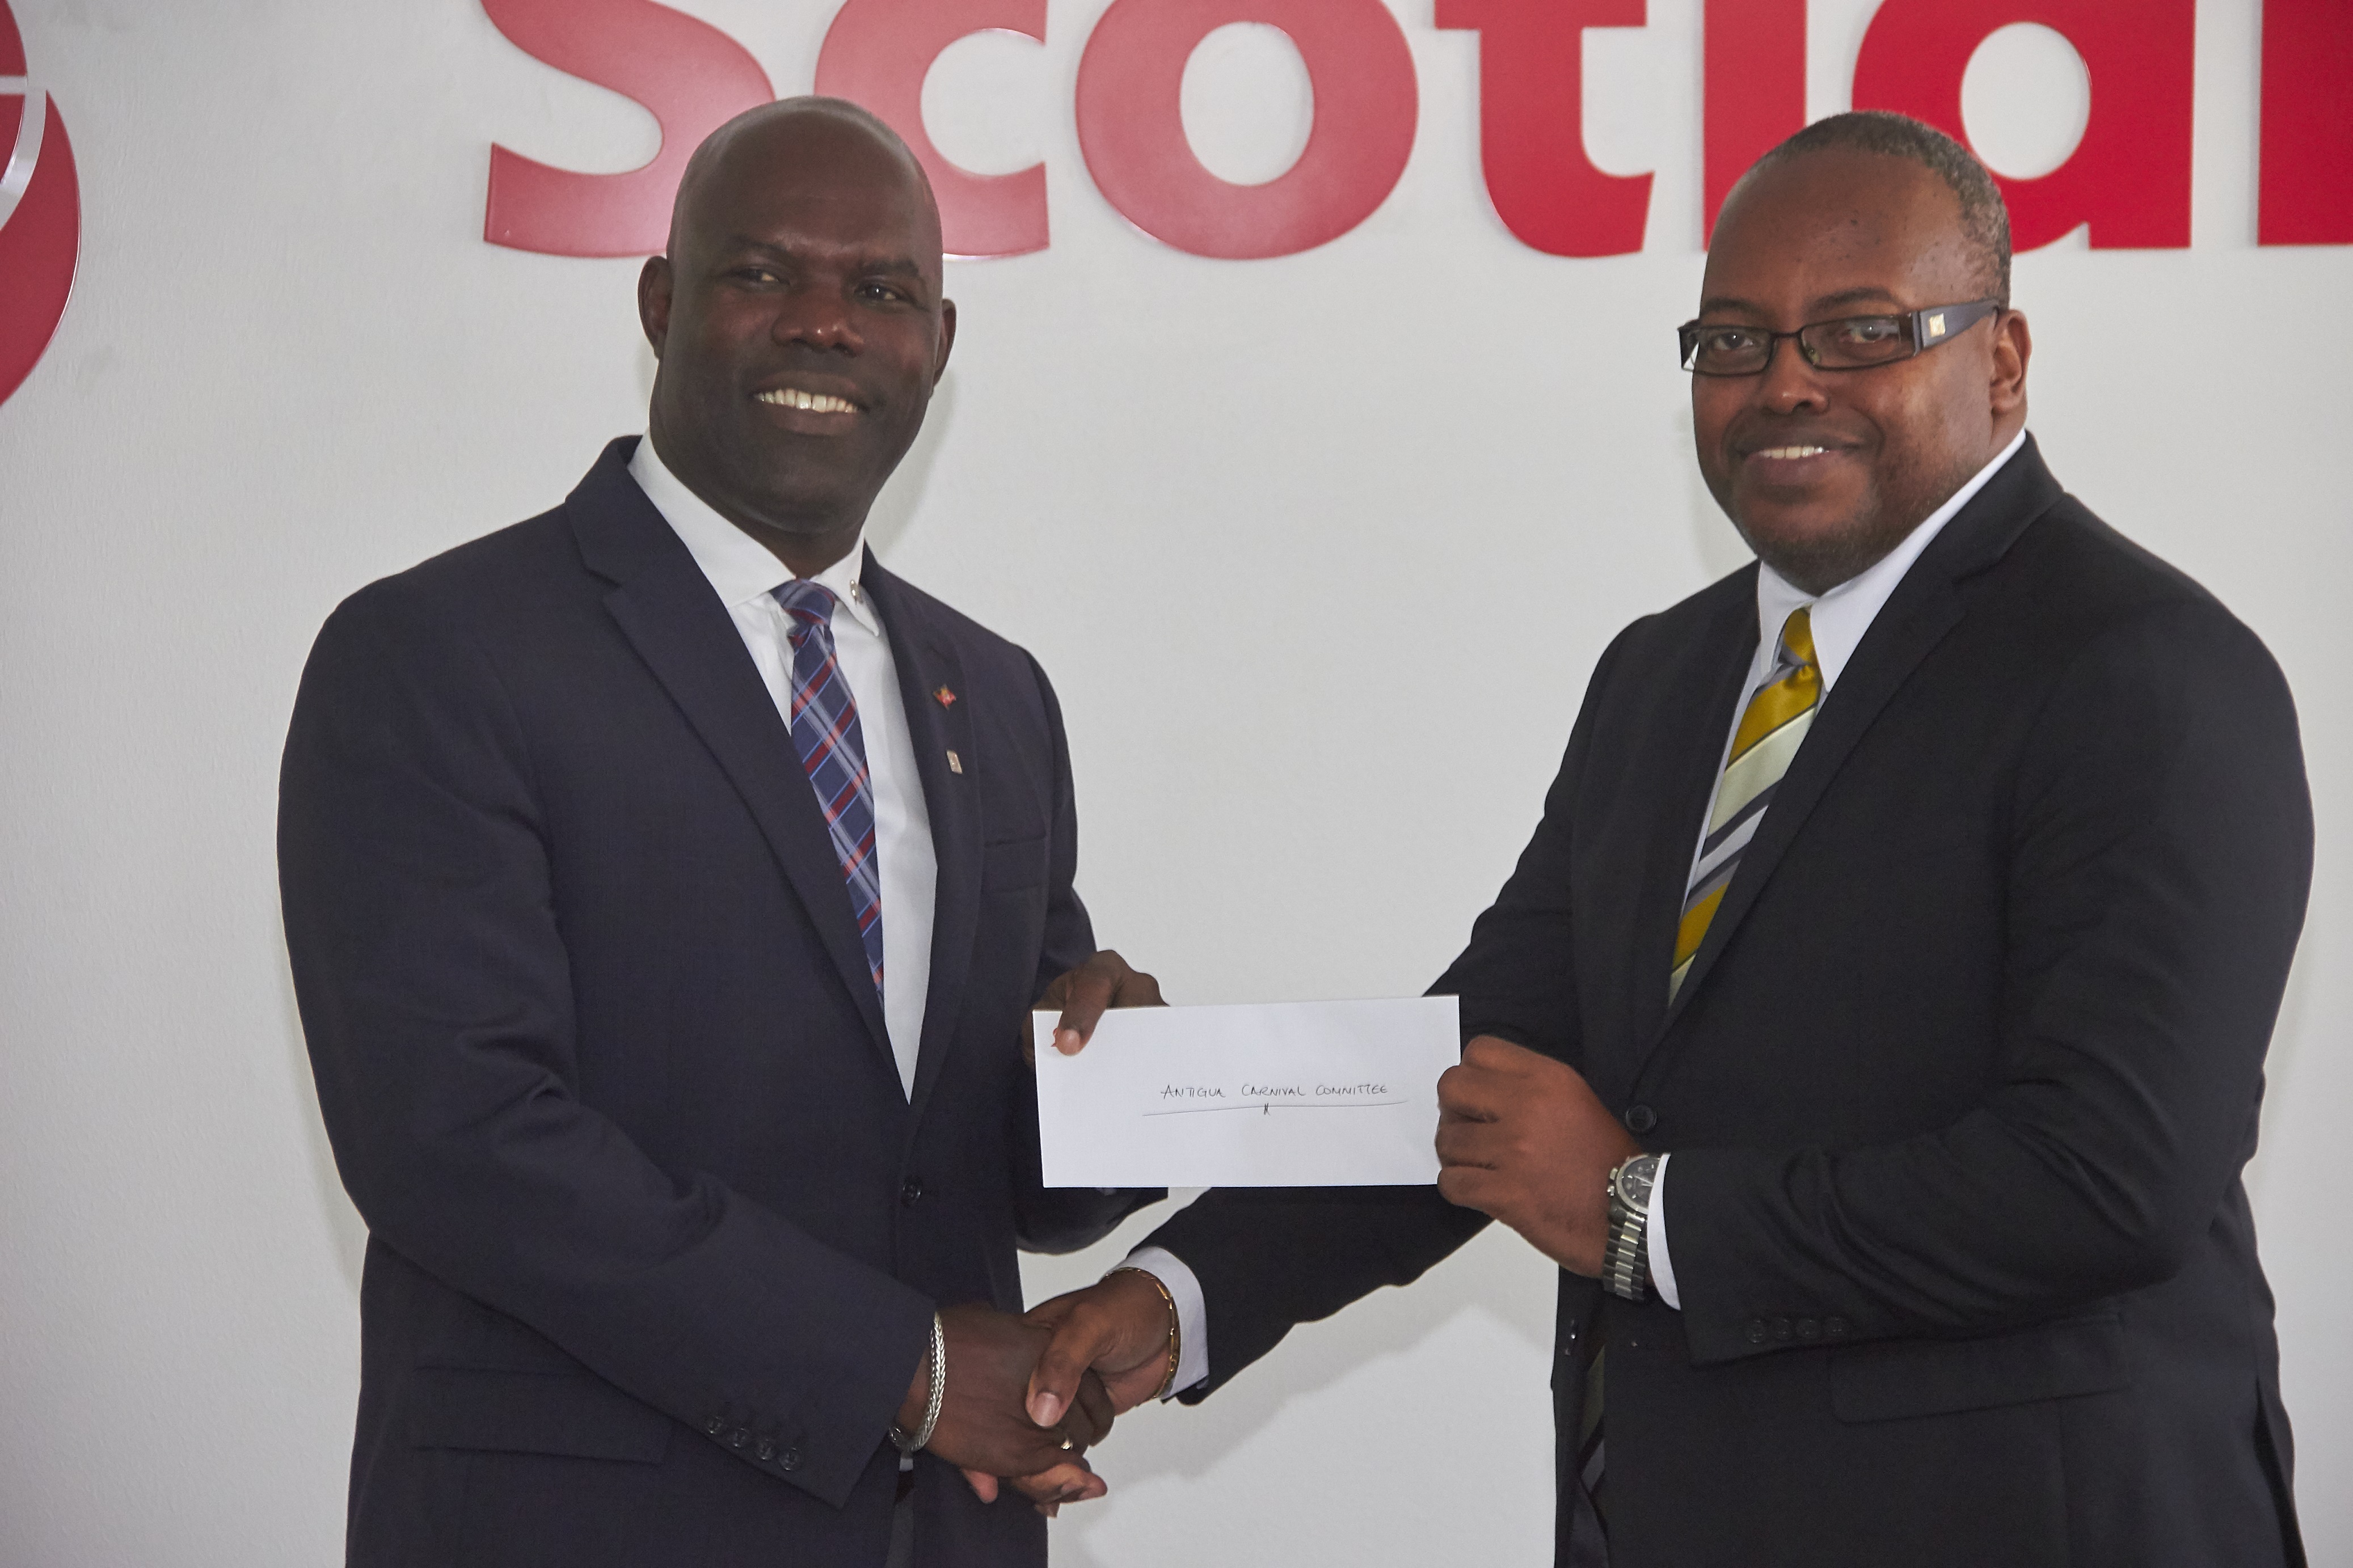 Chairman Of ABFC Maurice Merchant Accepts Cheque From Scotiabank Country Manager Gordon Julien